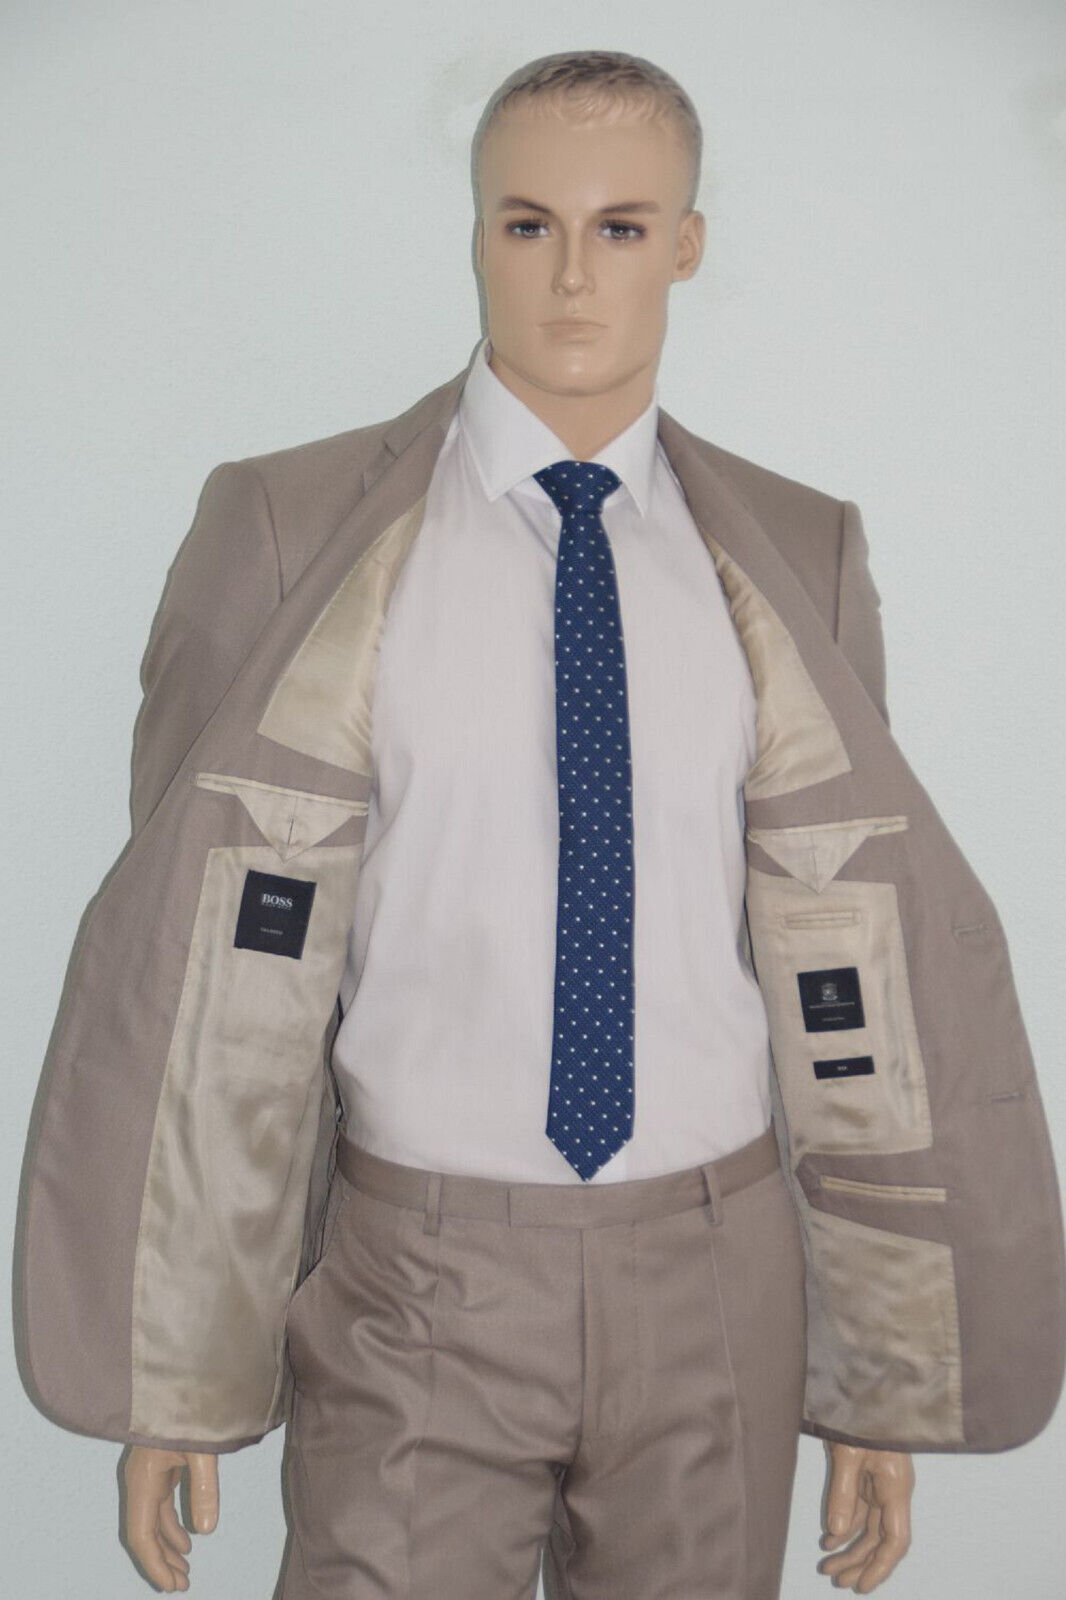 Pre-owned Hugo Boss Tailored Suit, Mod. T-howard2/court3, Size 102 / Us 42l, 100% Silk In Beige